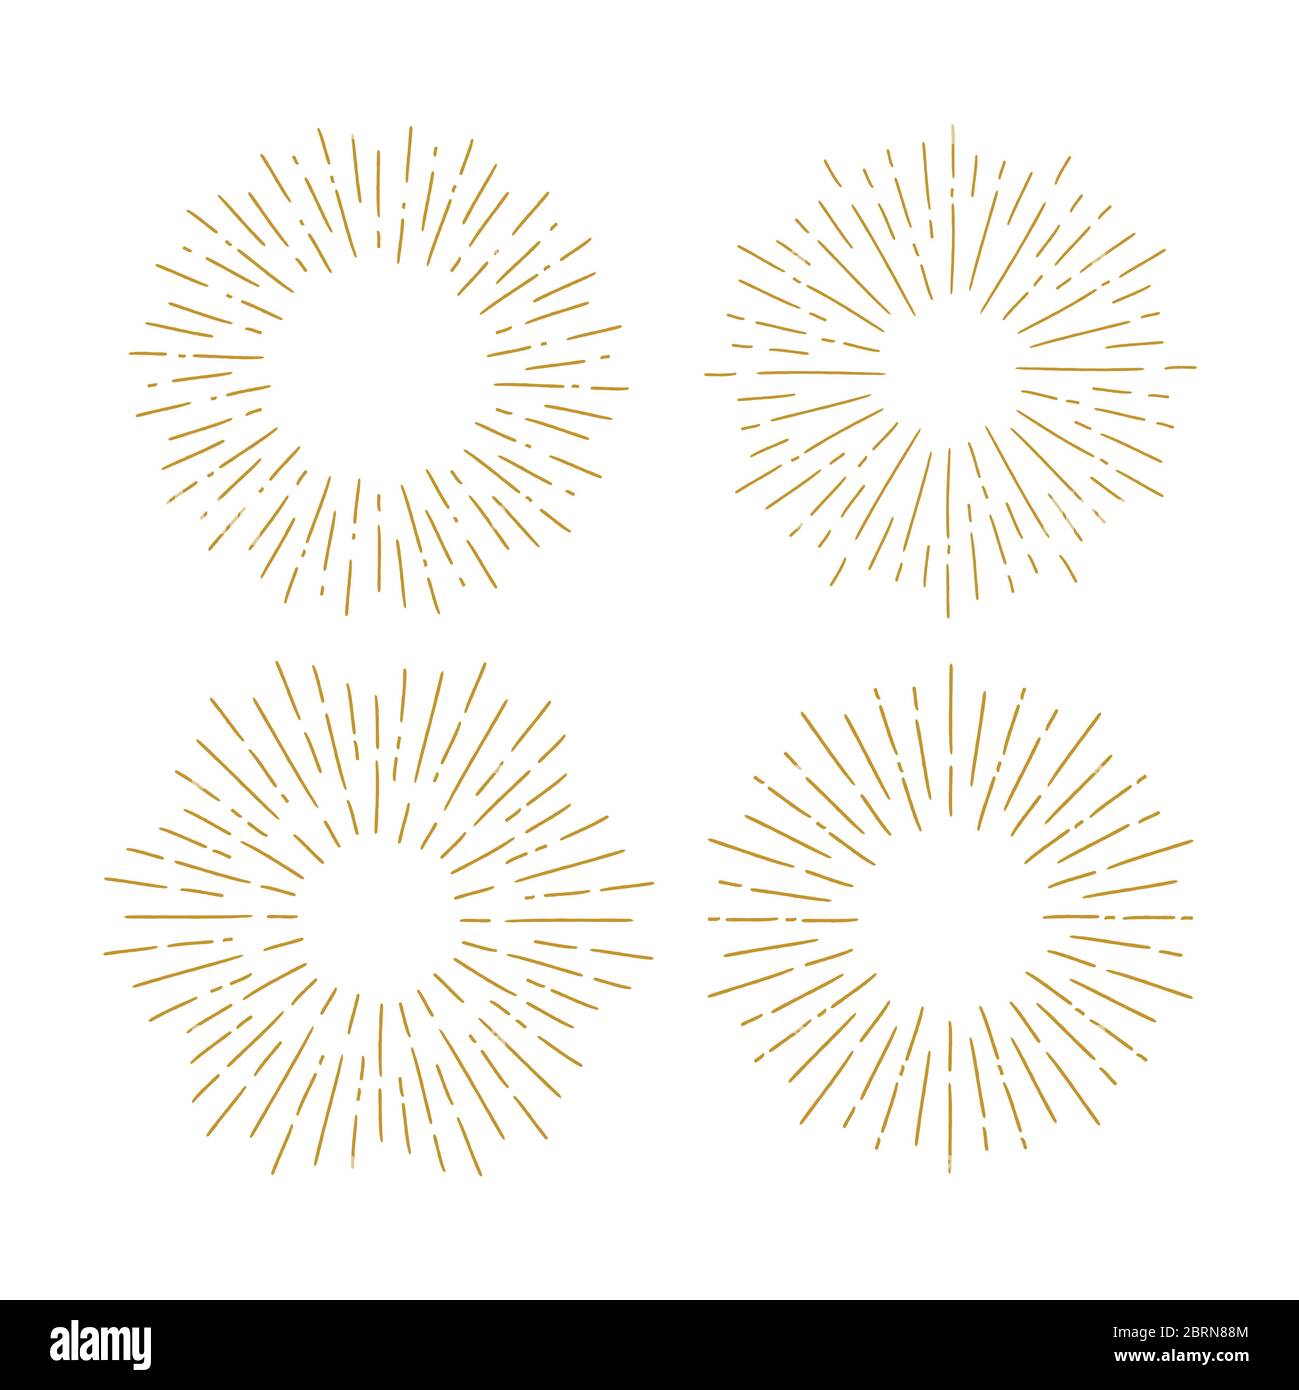 Set of Vintage Sunbursts in Different Shapes. Hipster Hand Drawn Retro Bursting Rays Design Elements. Stock Vector